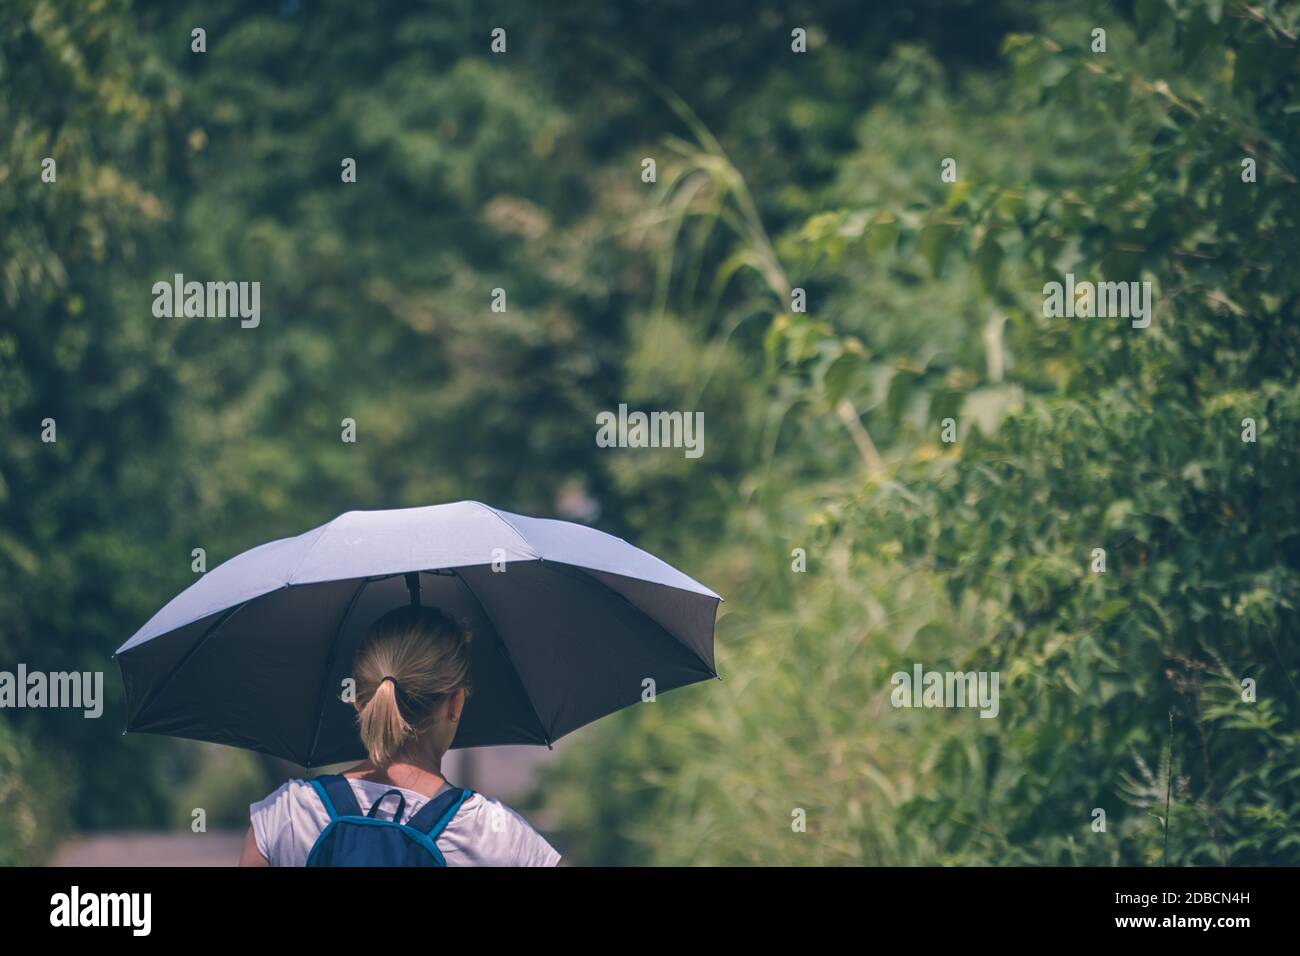 A view of a blond woman holding an umbrella while walking in a tree-covered field Stock Photo